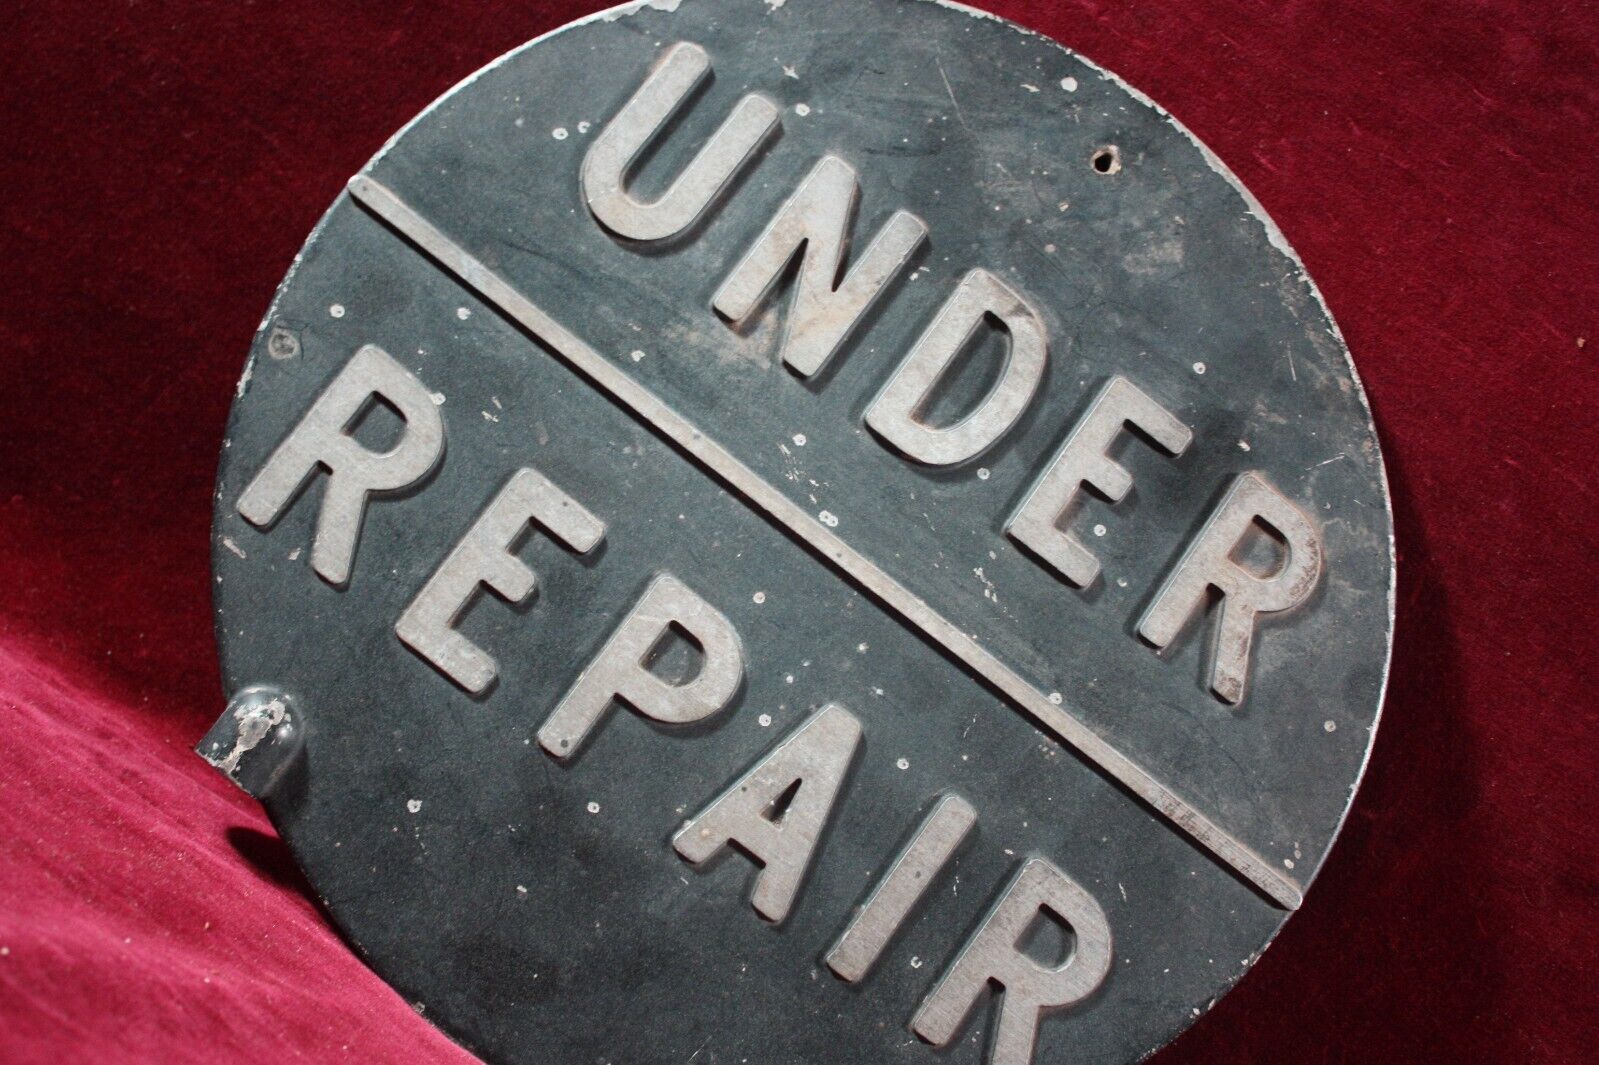 * VINTAGE ANTIQUE UNDER REPAIR METAL SIGN DOUBLE SIDED 1930 1940 RAISED LETTER *